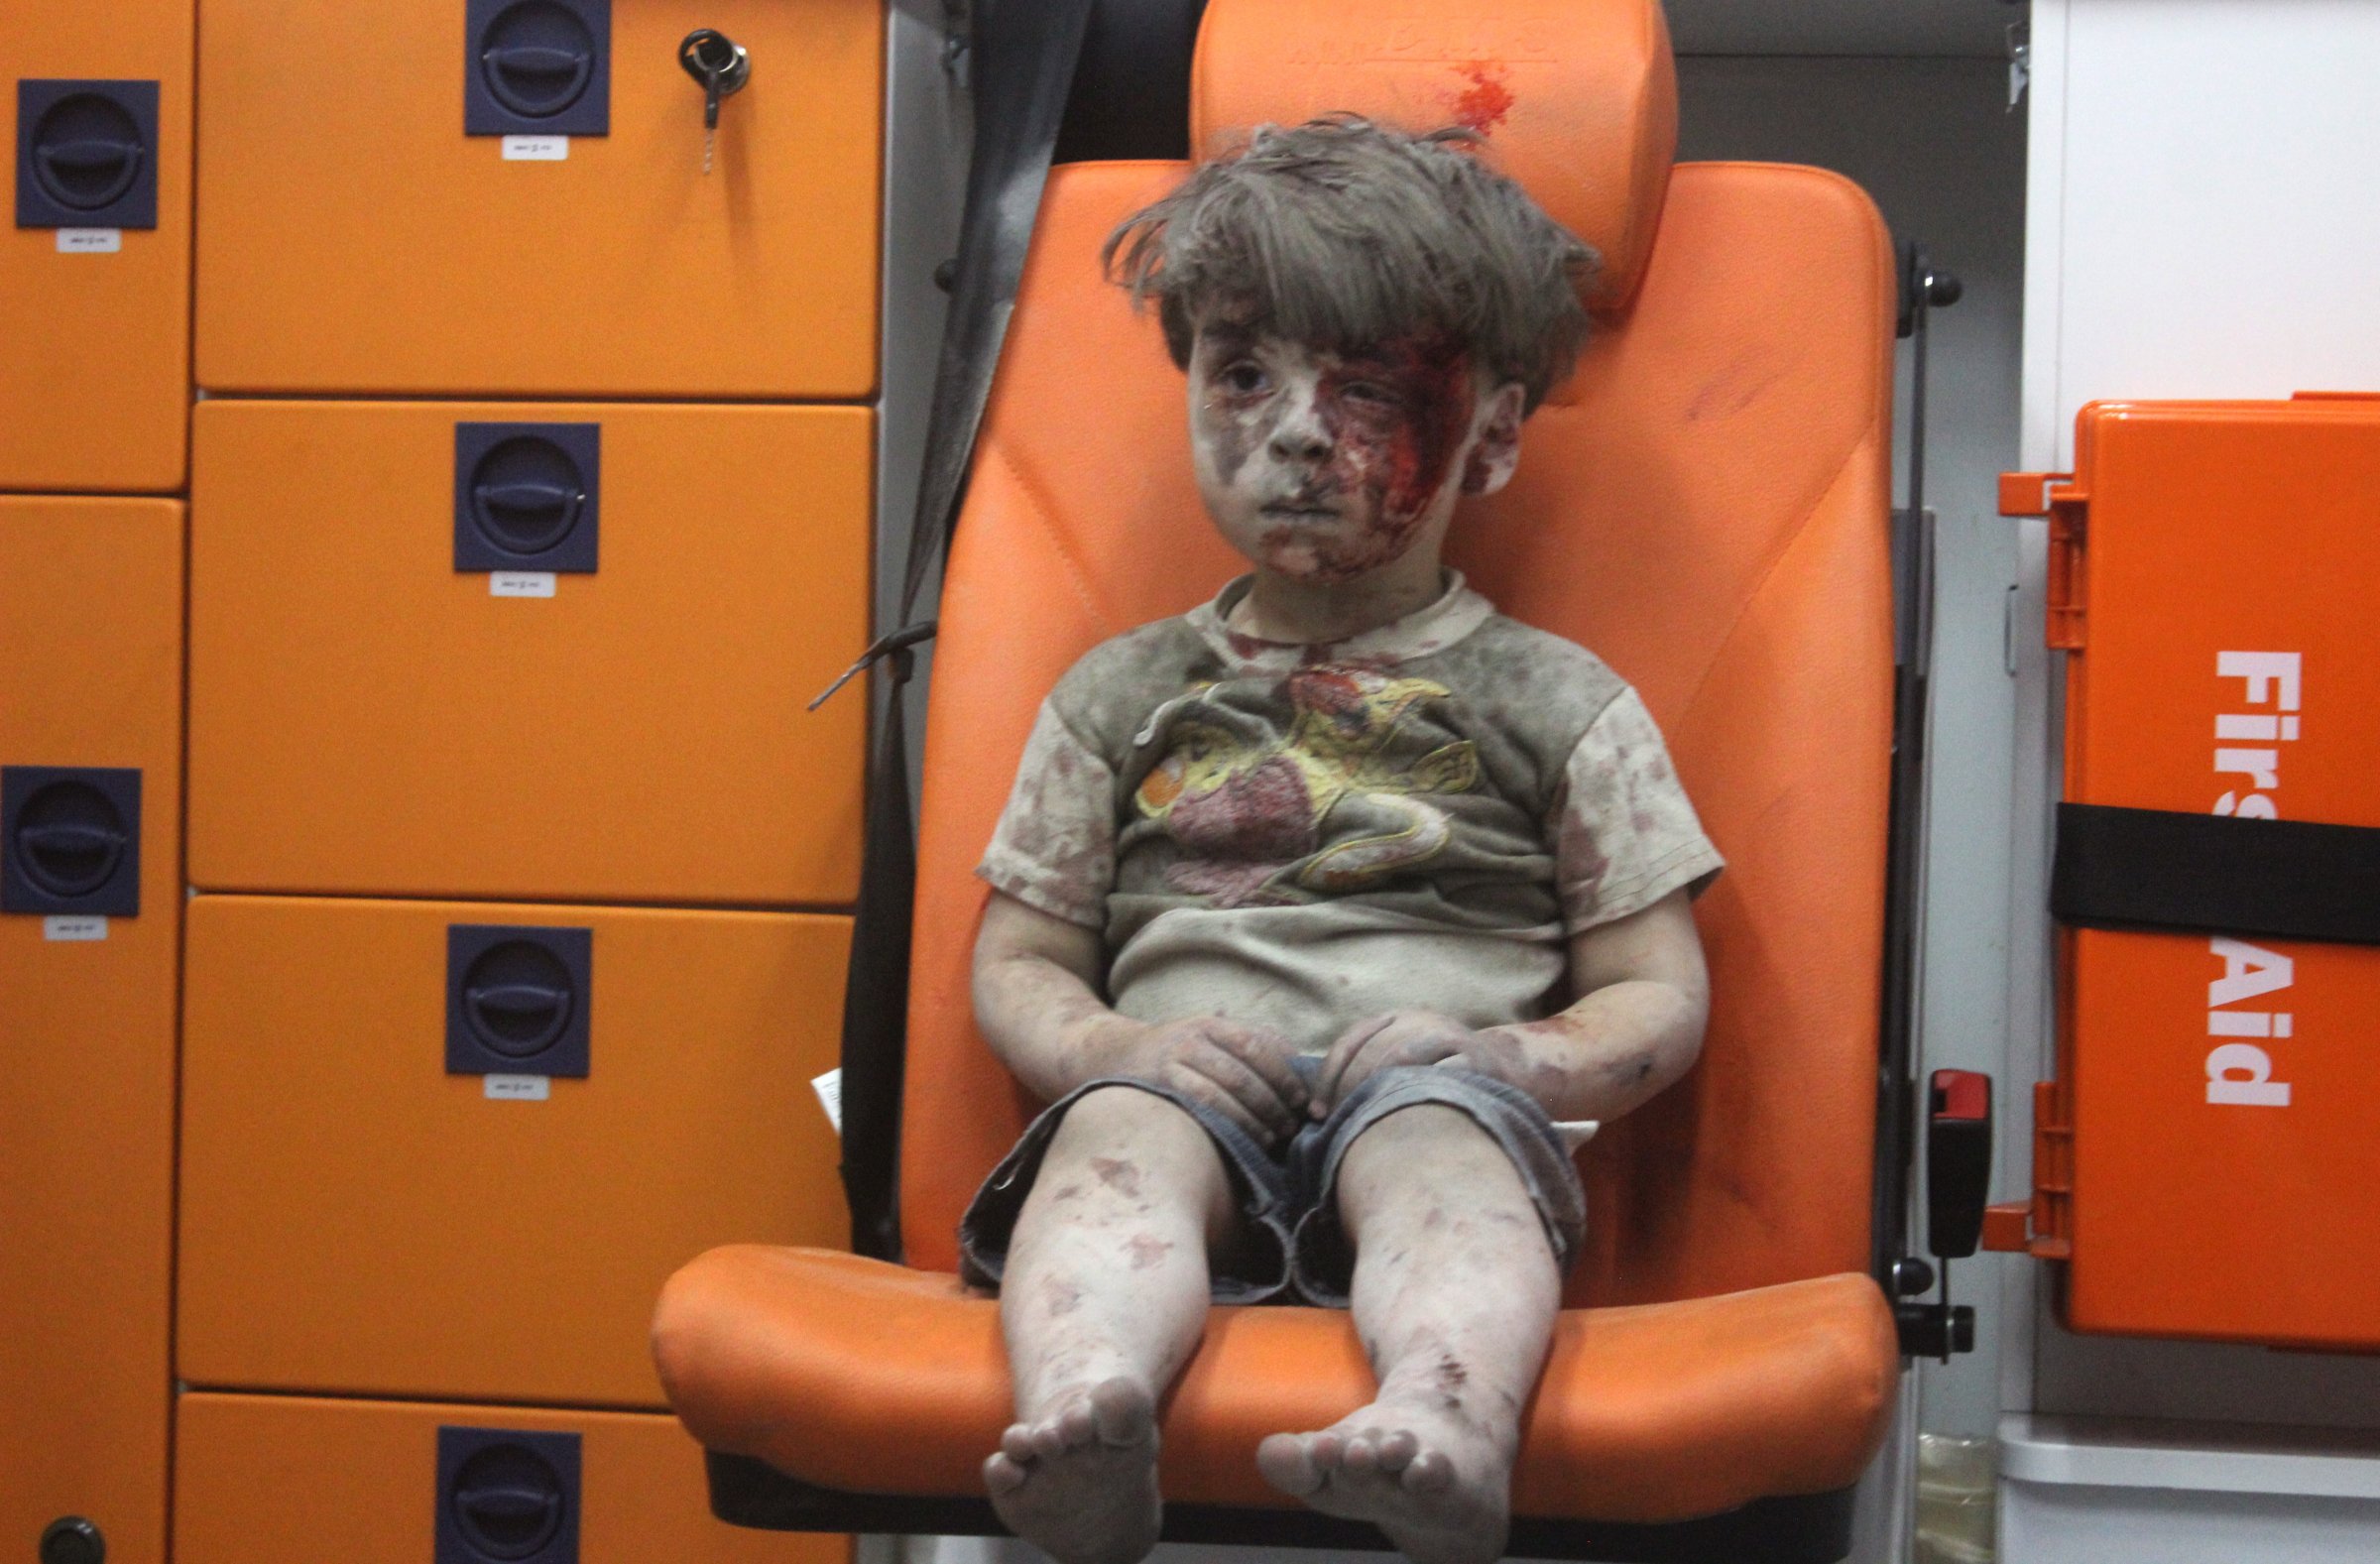 Five-year-old Syrian boy Omran Daqneesh sits in the back of the ambulance after he was injured during an airstrike in Aleppo, Syria, on Aug. 17, 2016.